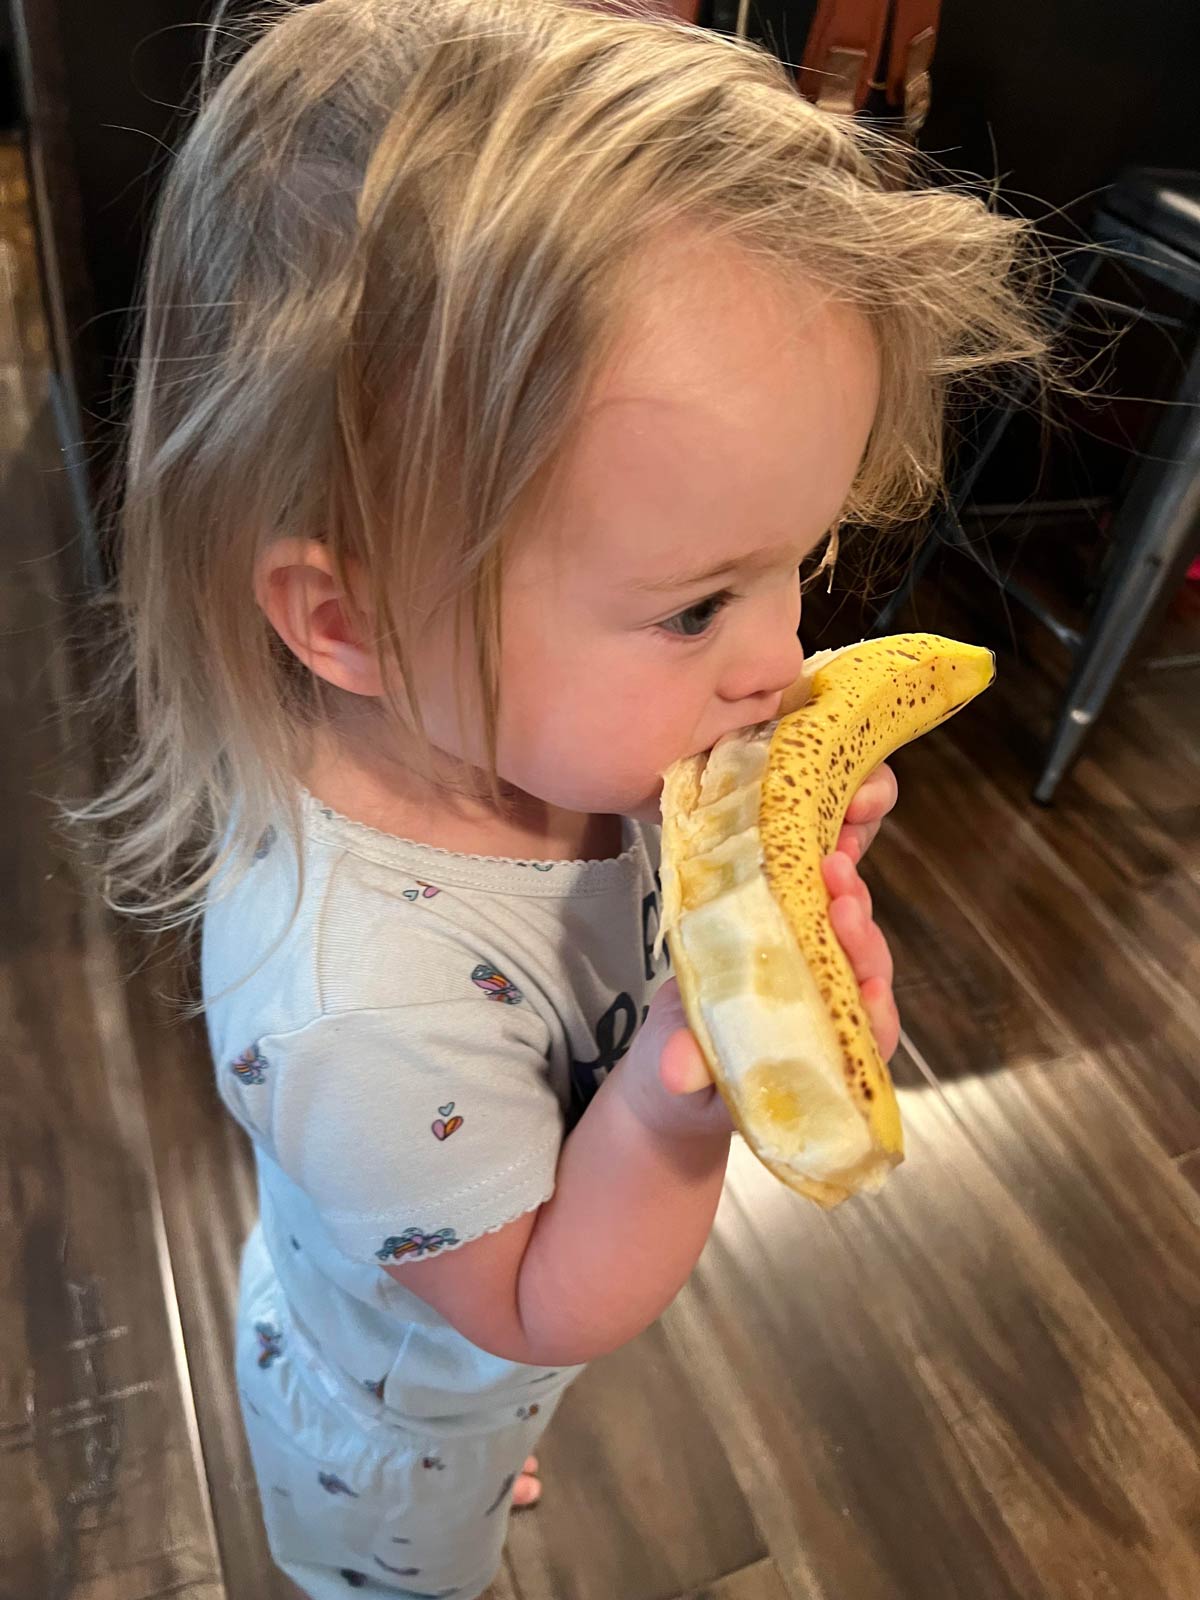 My kid wanted to “open” the banana by herself this morning. Am I raising a serial killer?